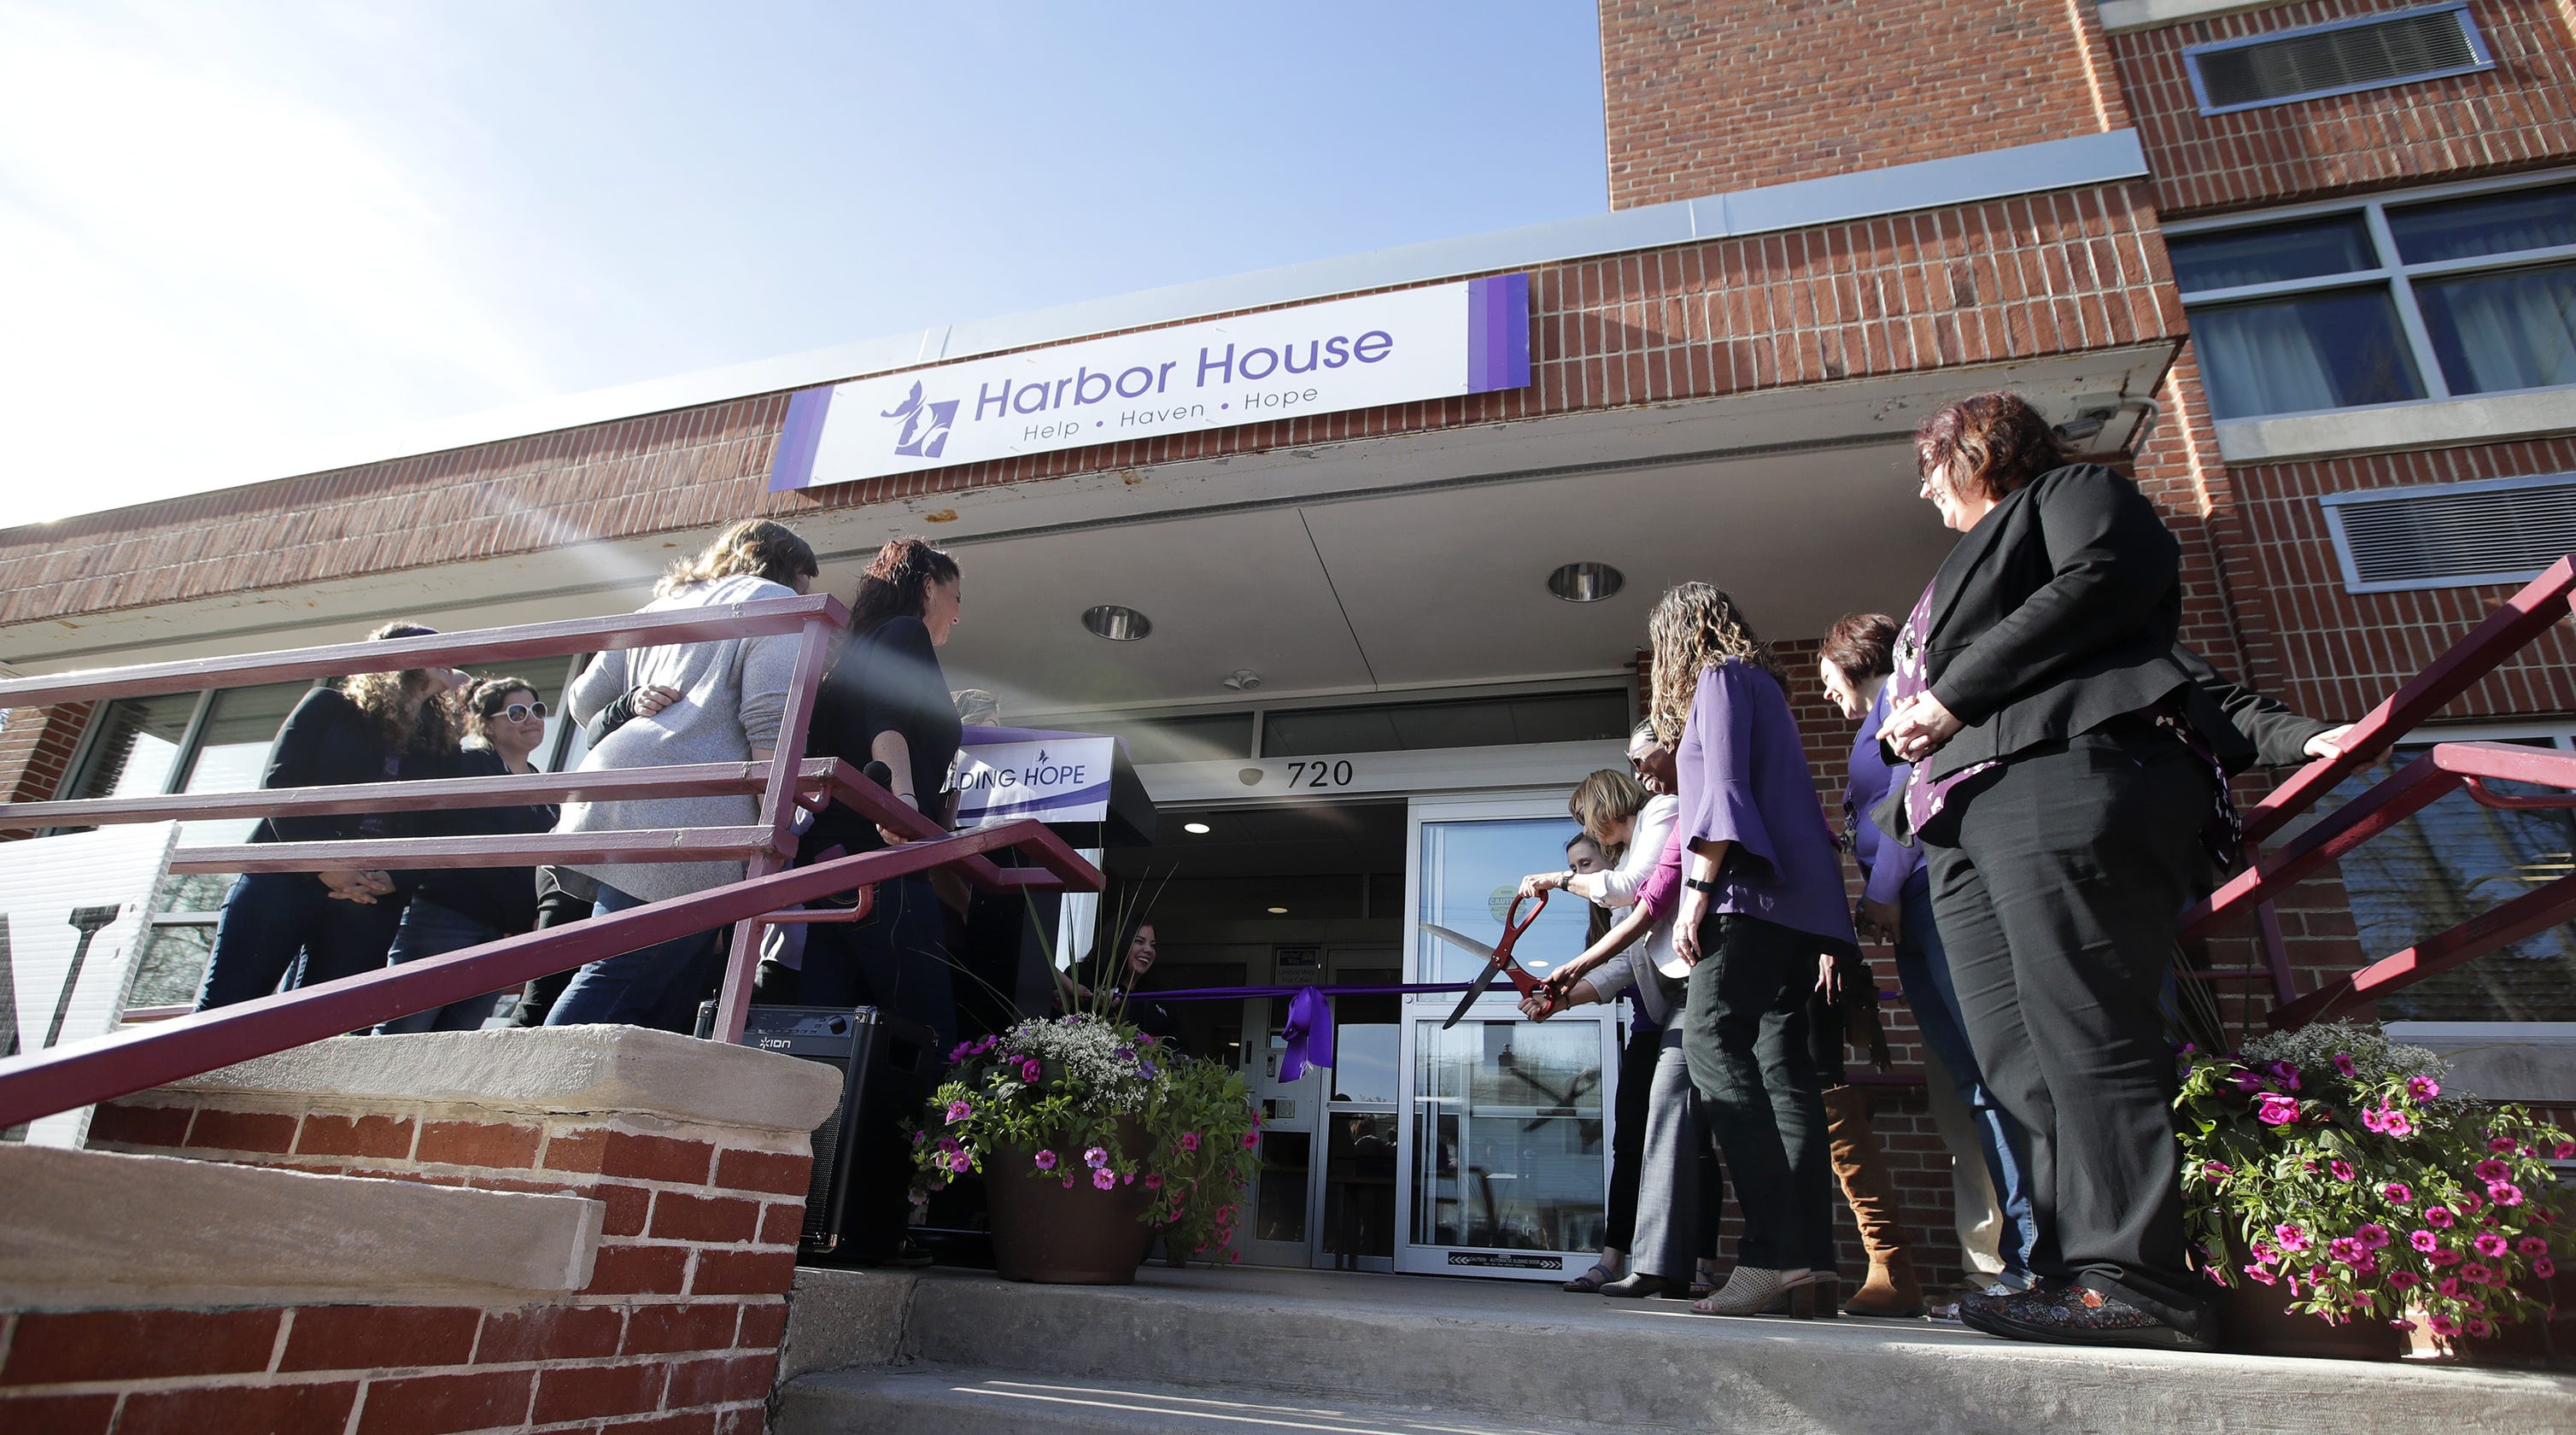 Harbor House Public gets glimpse of expanded domestic 